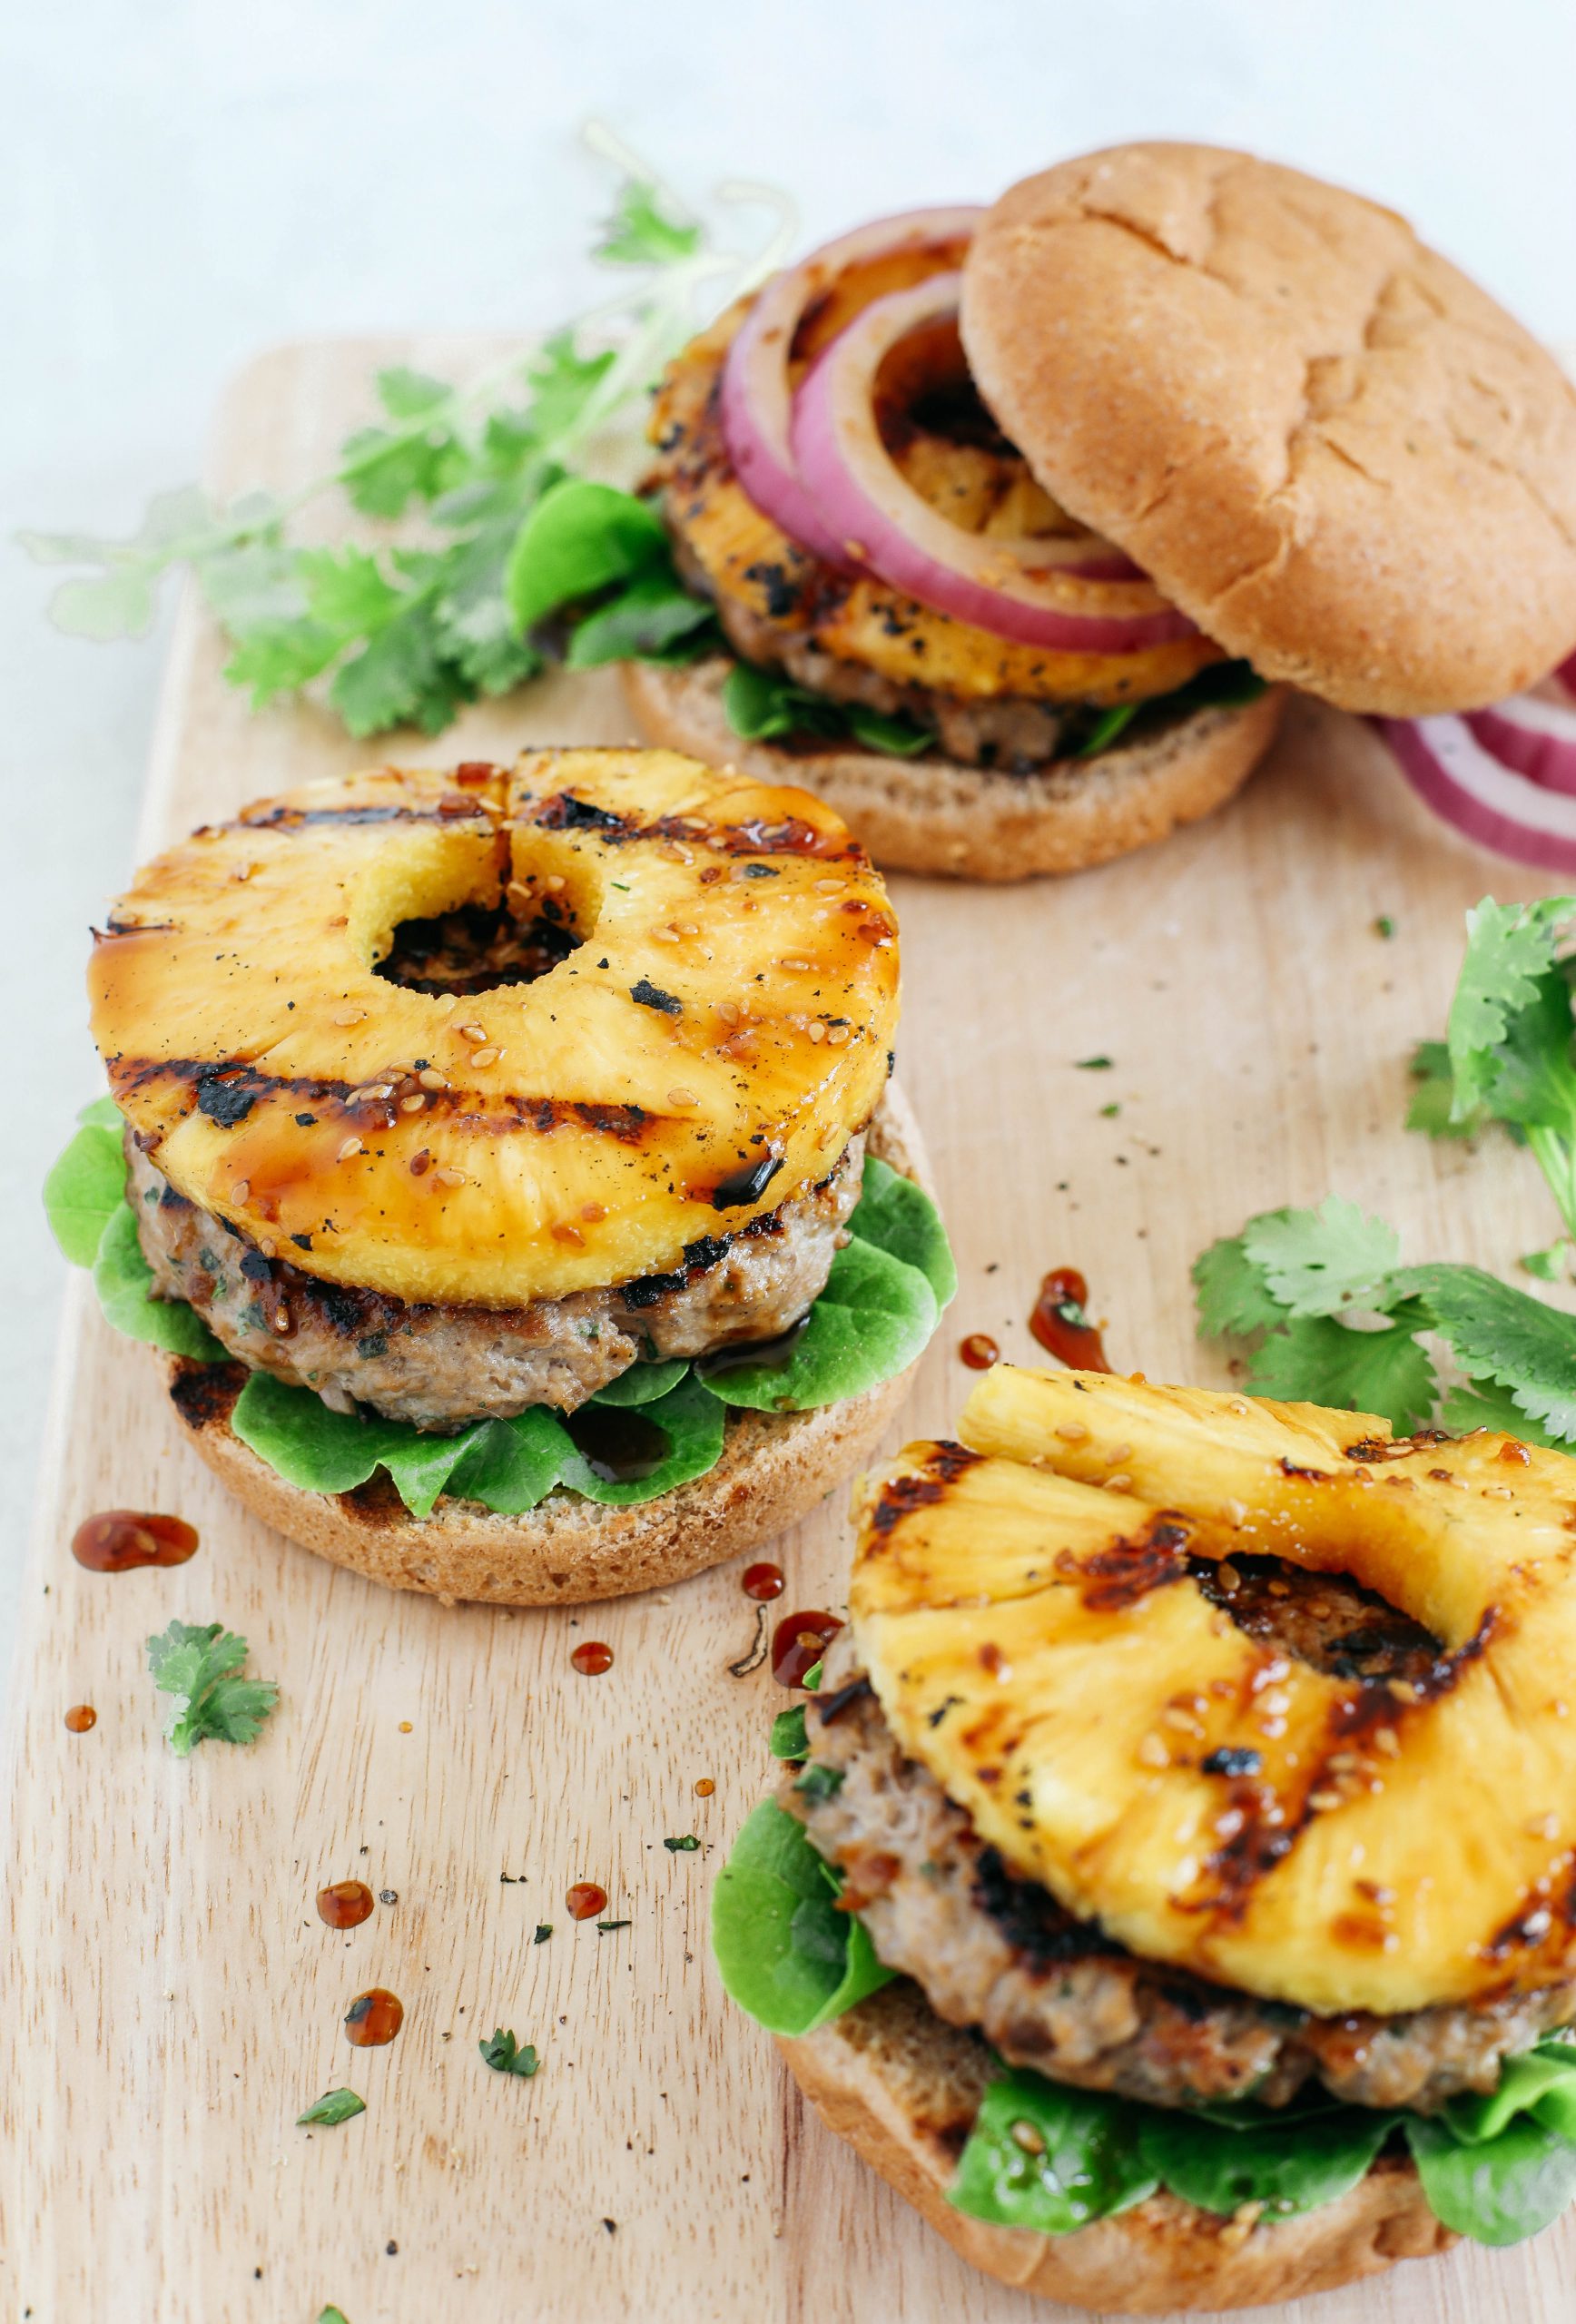 These delicious Hawaiian Turkey Burgers are packed with tons of flavor, made with a healthy homemade teriyaki sauce and topped with fresh grilled pineapple!